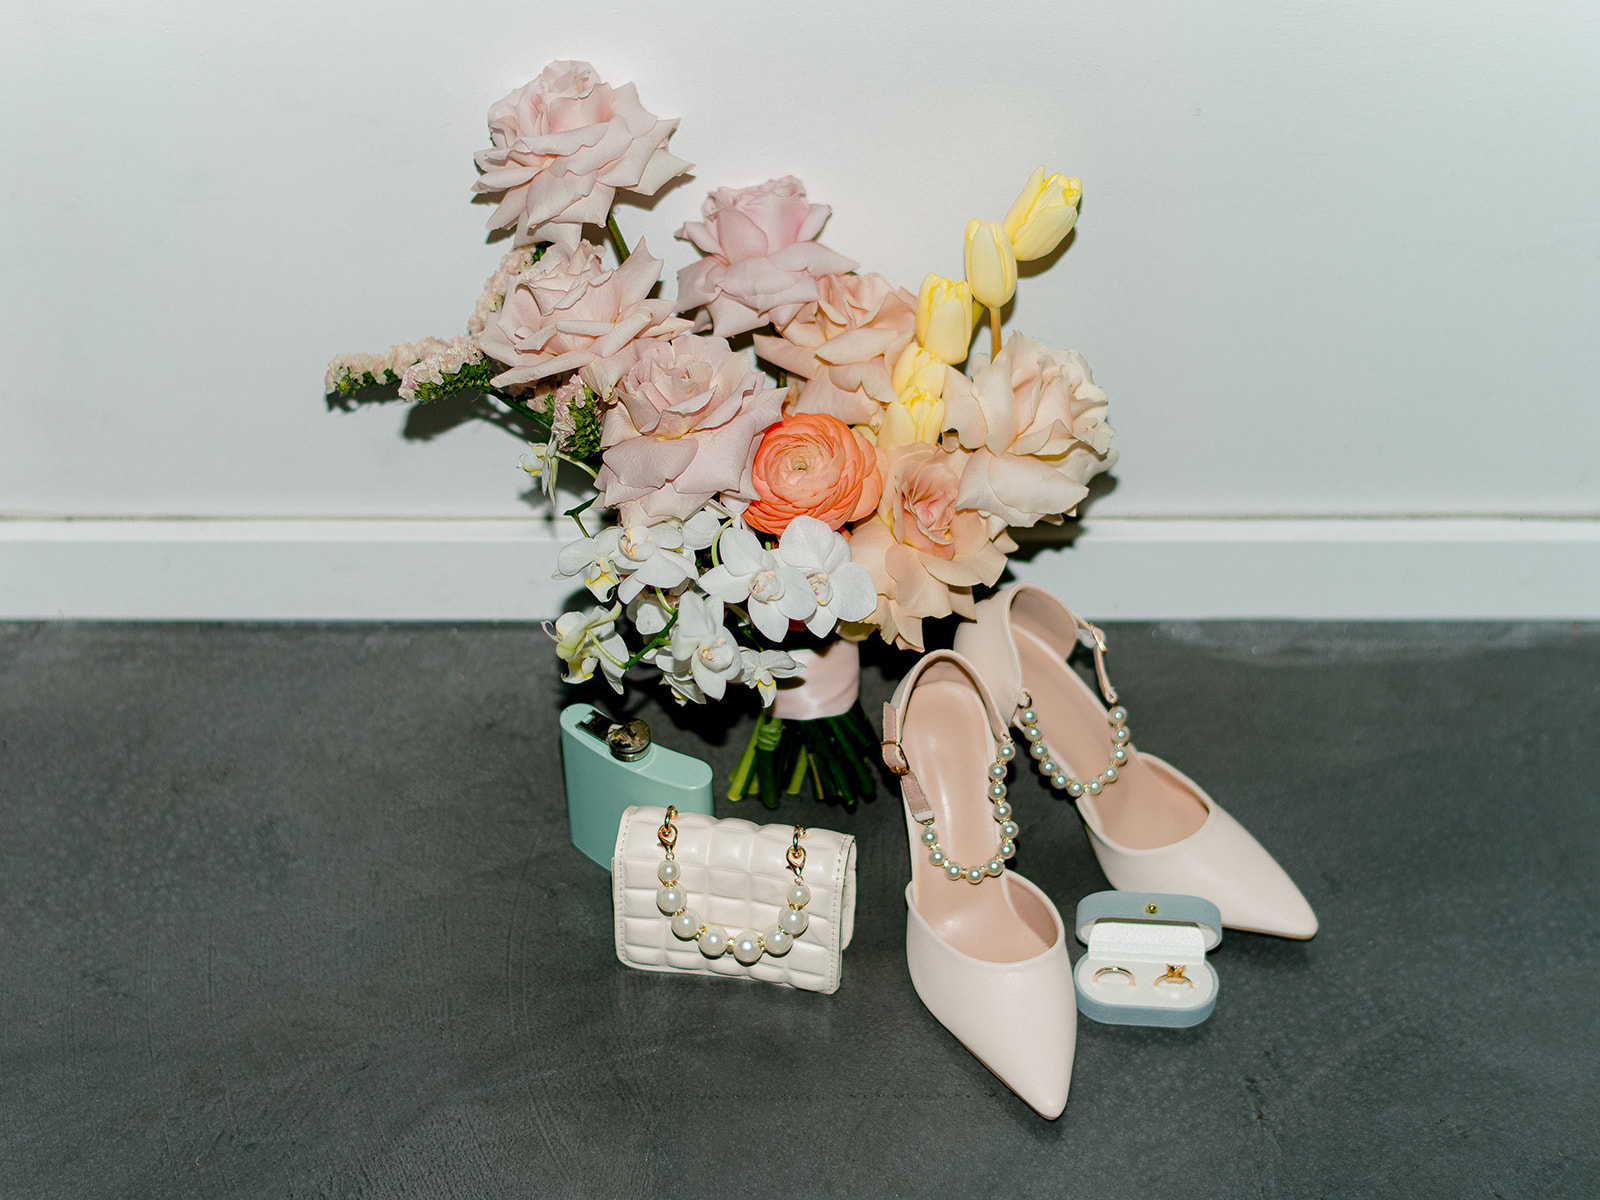 Colourful bridal bouquet captured in detailed photo alongside blue velvet ring box, tiffany blue flash and mini quilted bridal purse, studio wedding venue ideas, modern bridal accessories